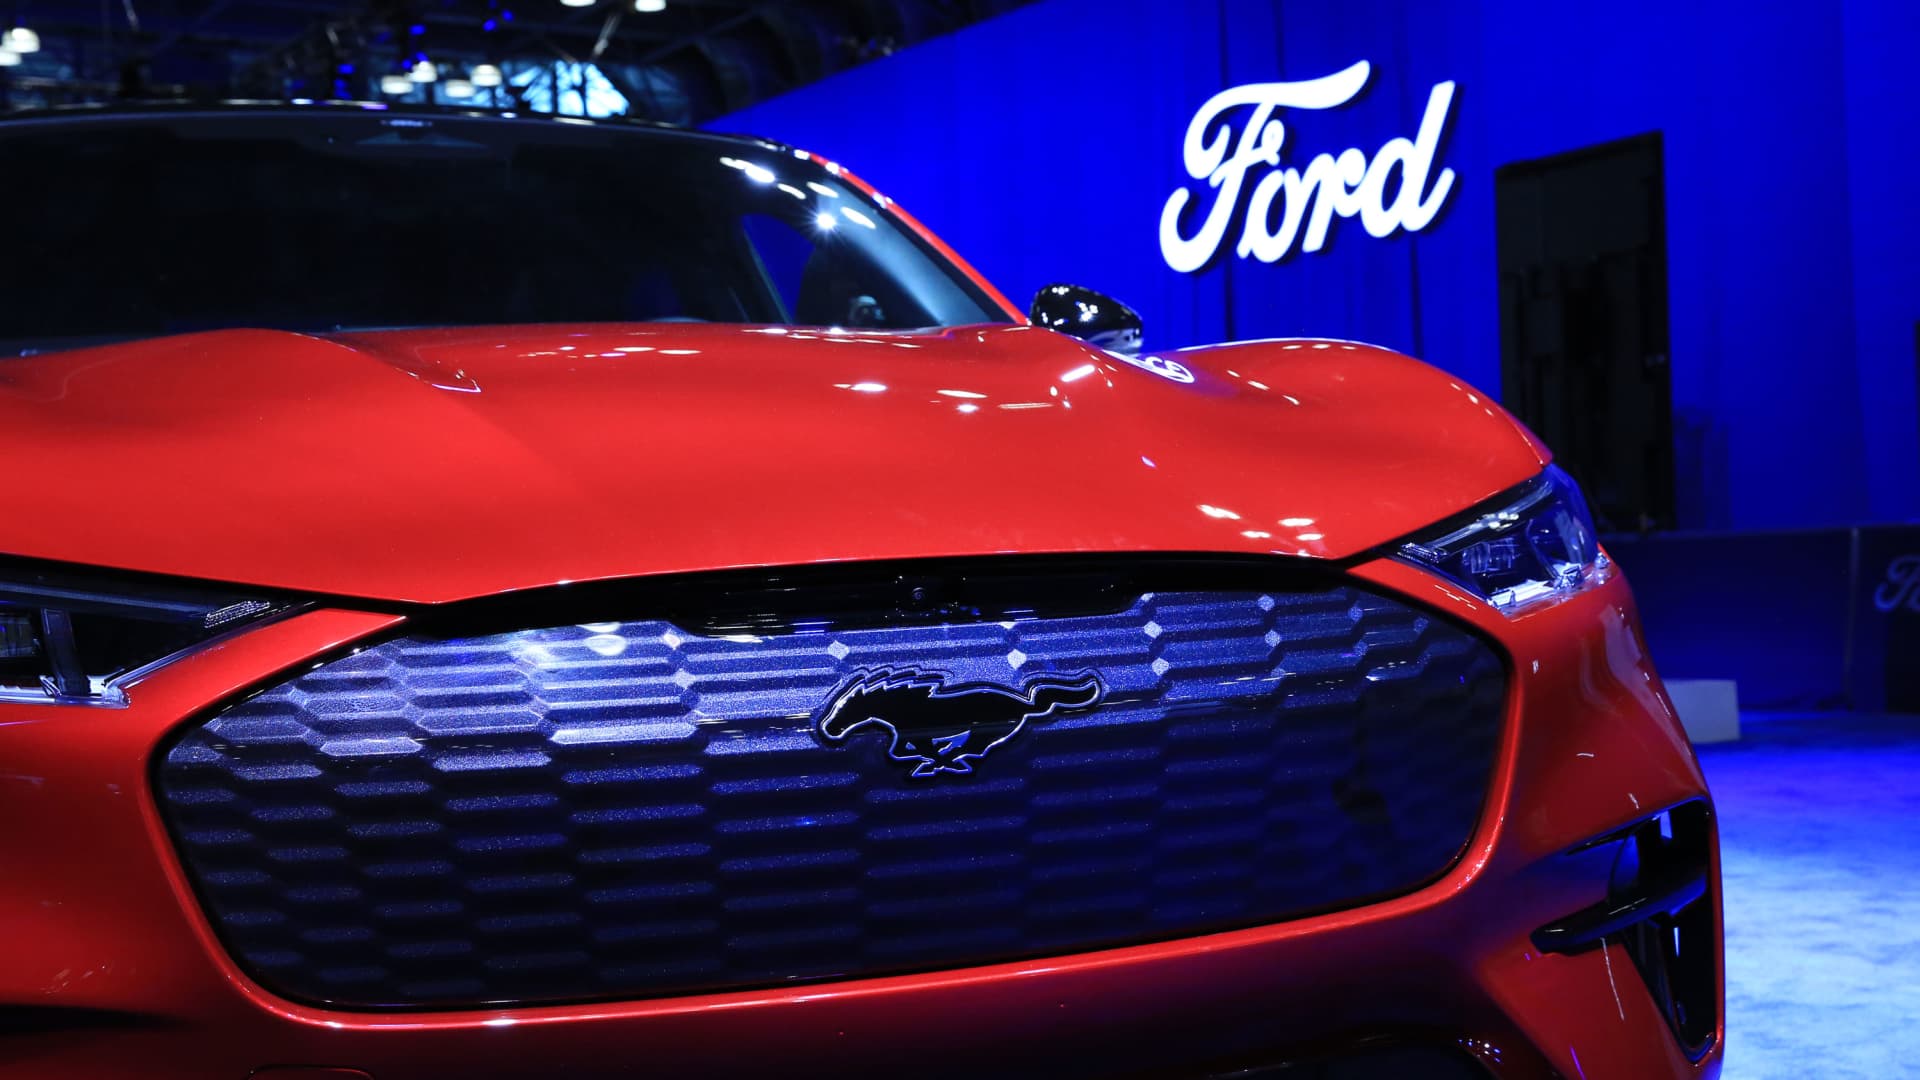 Ford Motor is set to report earnings after the bell. Here’s what Wall Street expects Auto Recent